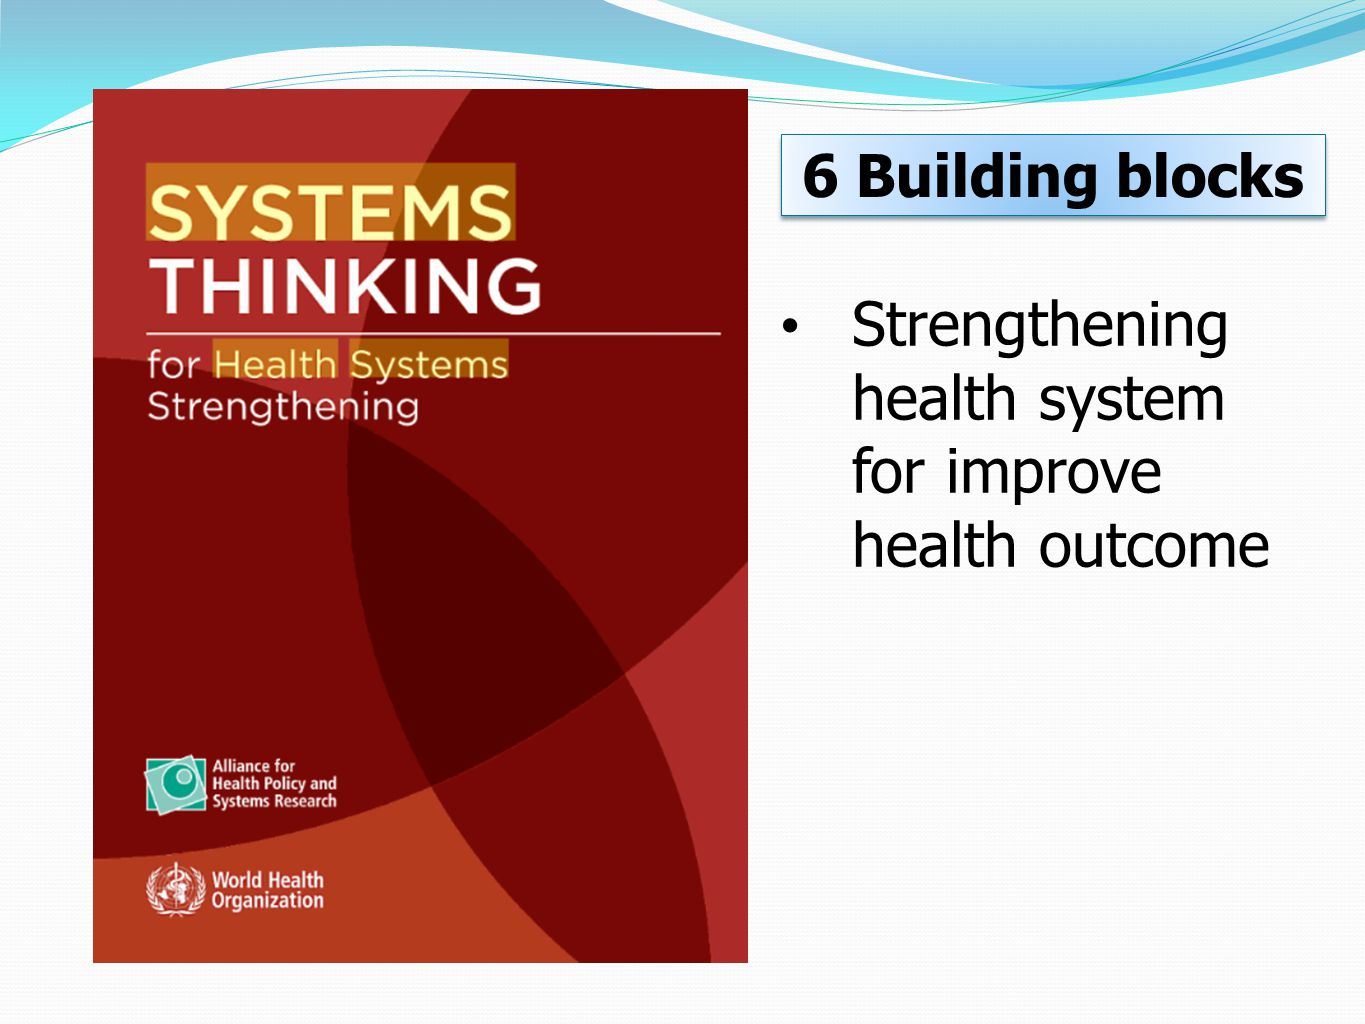 Strengthening health system for improve health outcome